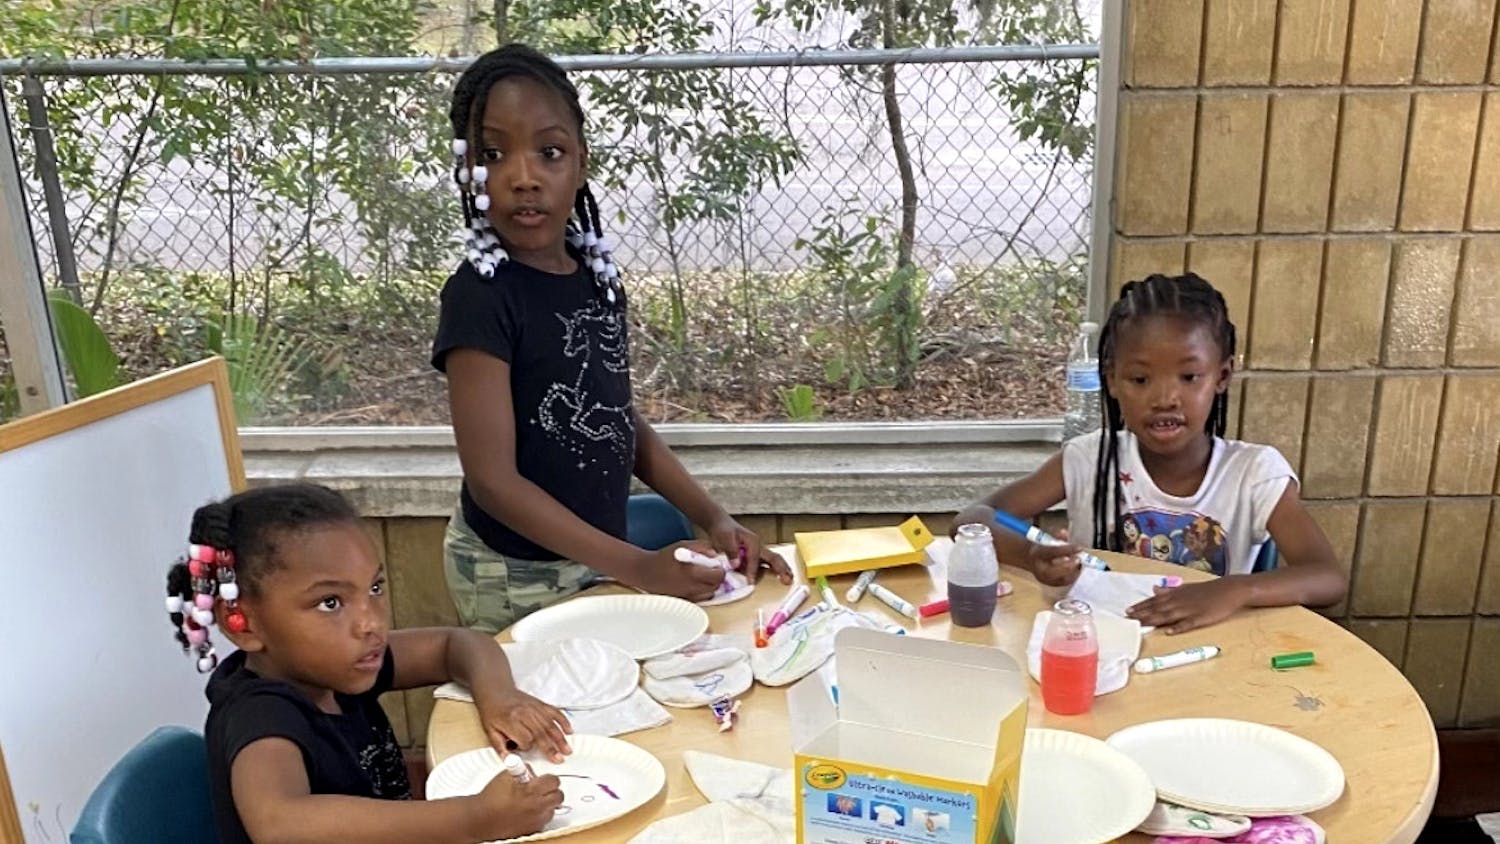 (From left to right): Sereniti Miller, Seyvyer Miller and Aariona Williams keep themselves busy with arts and crafts at Wash King on Tuesday, March 28, 2023.